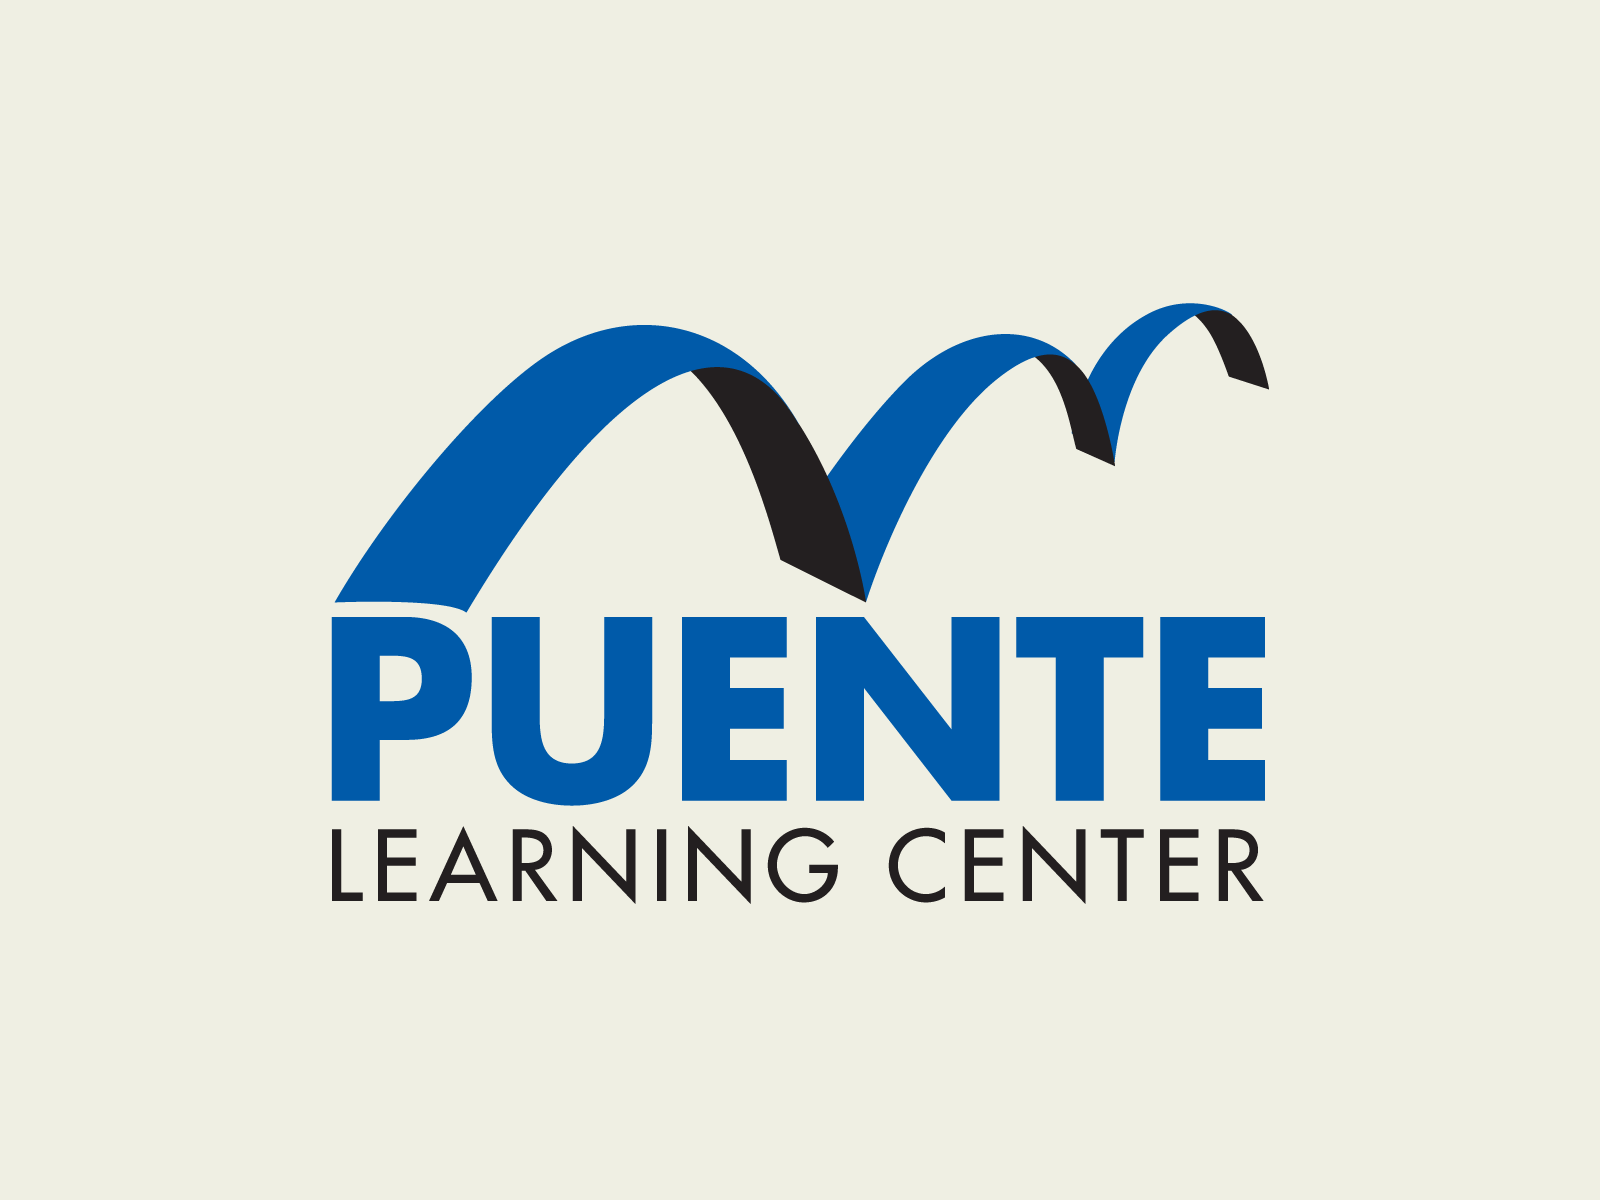 PUENTE Learning Center